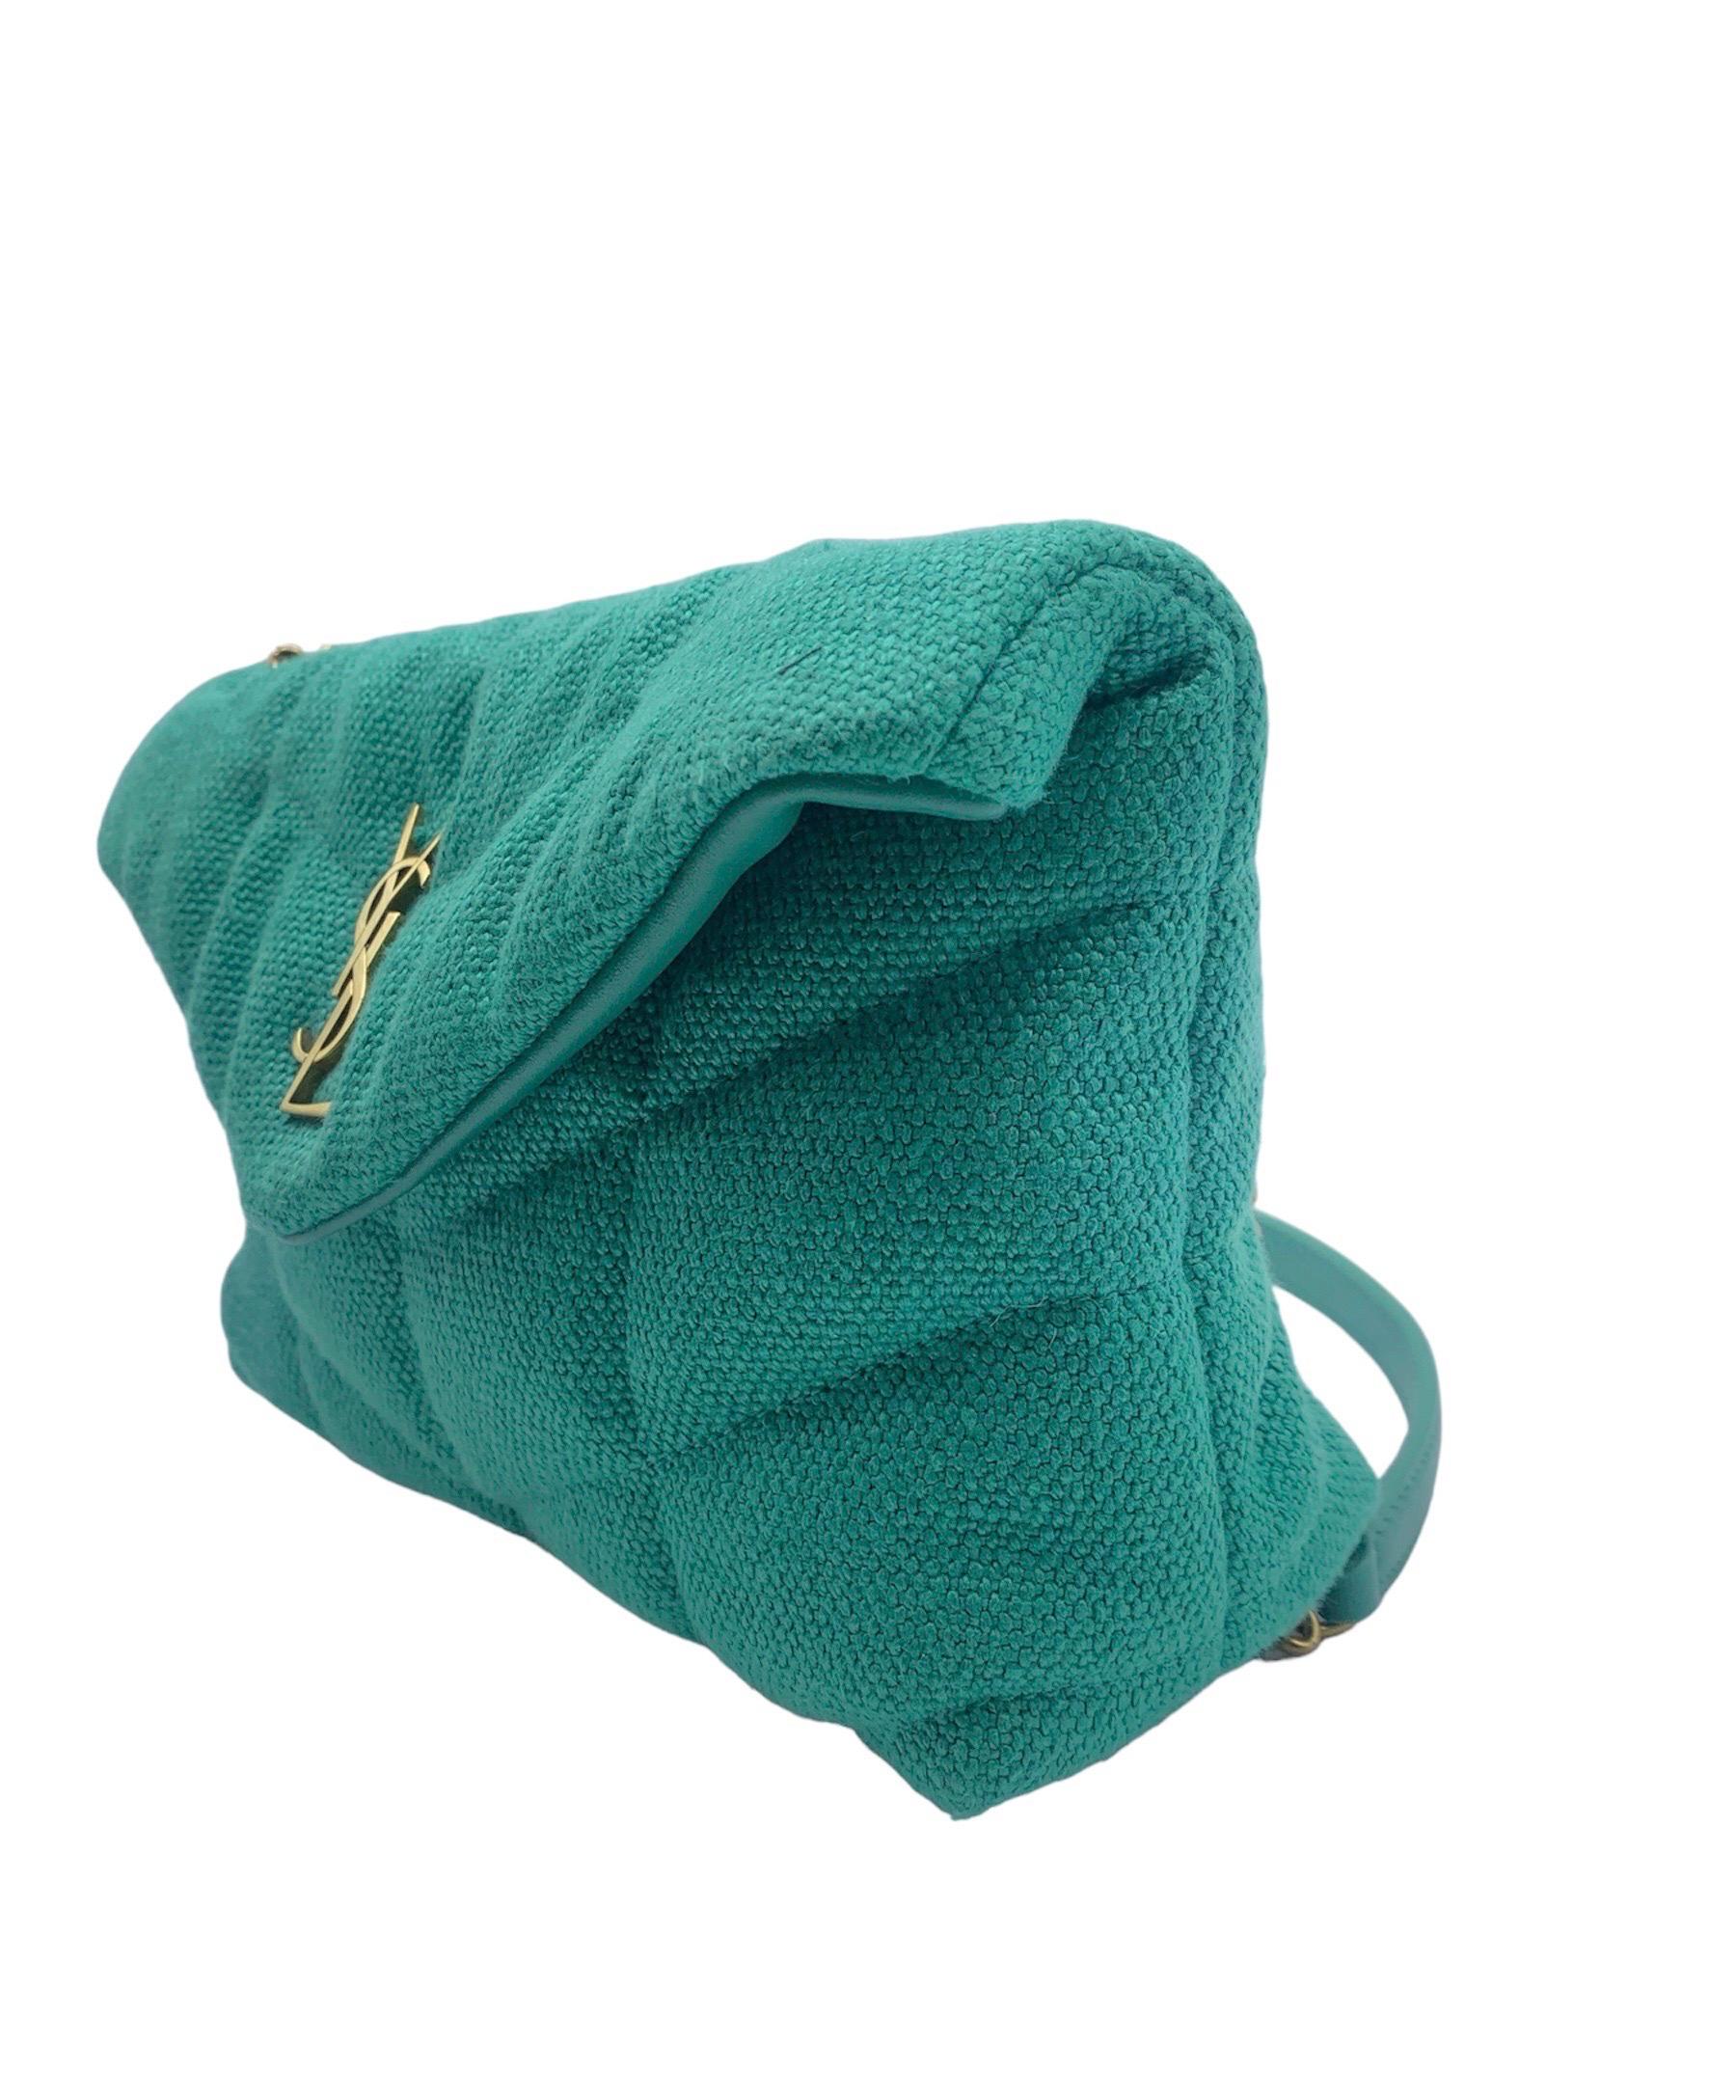 Borsa A Spalla Saint Laurent Puffer Toy Tela Verde In Good Condition For Sale In Torre Del Greco, IT